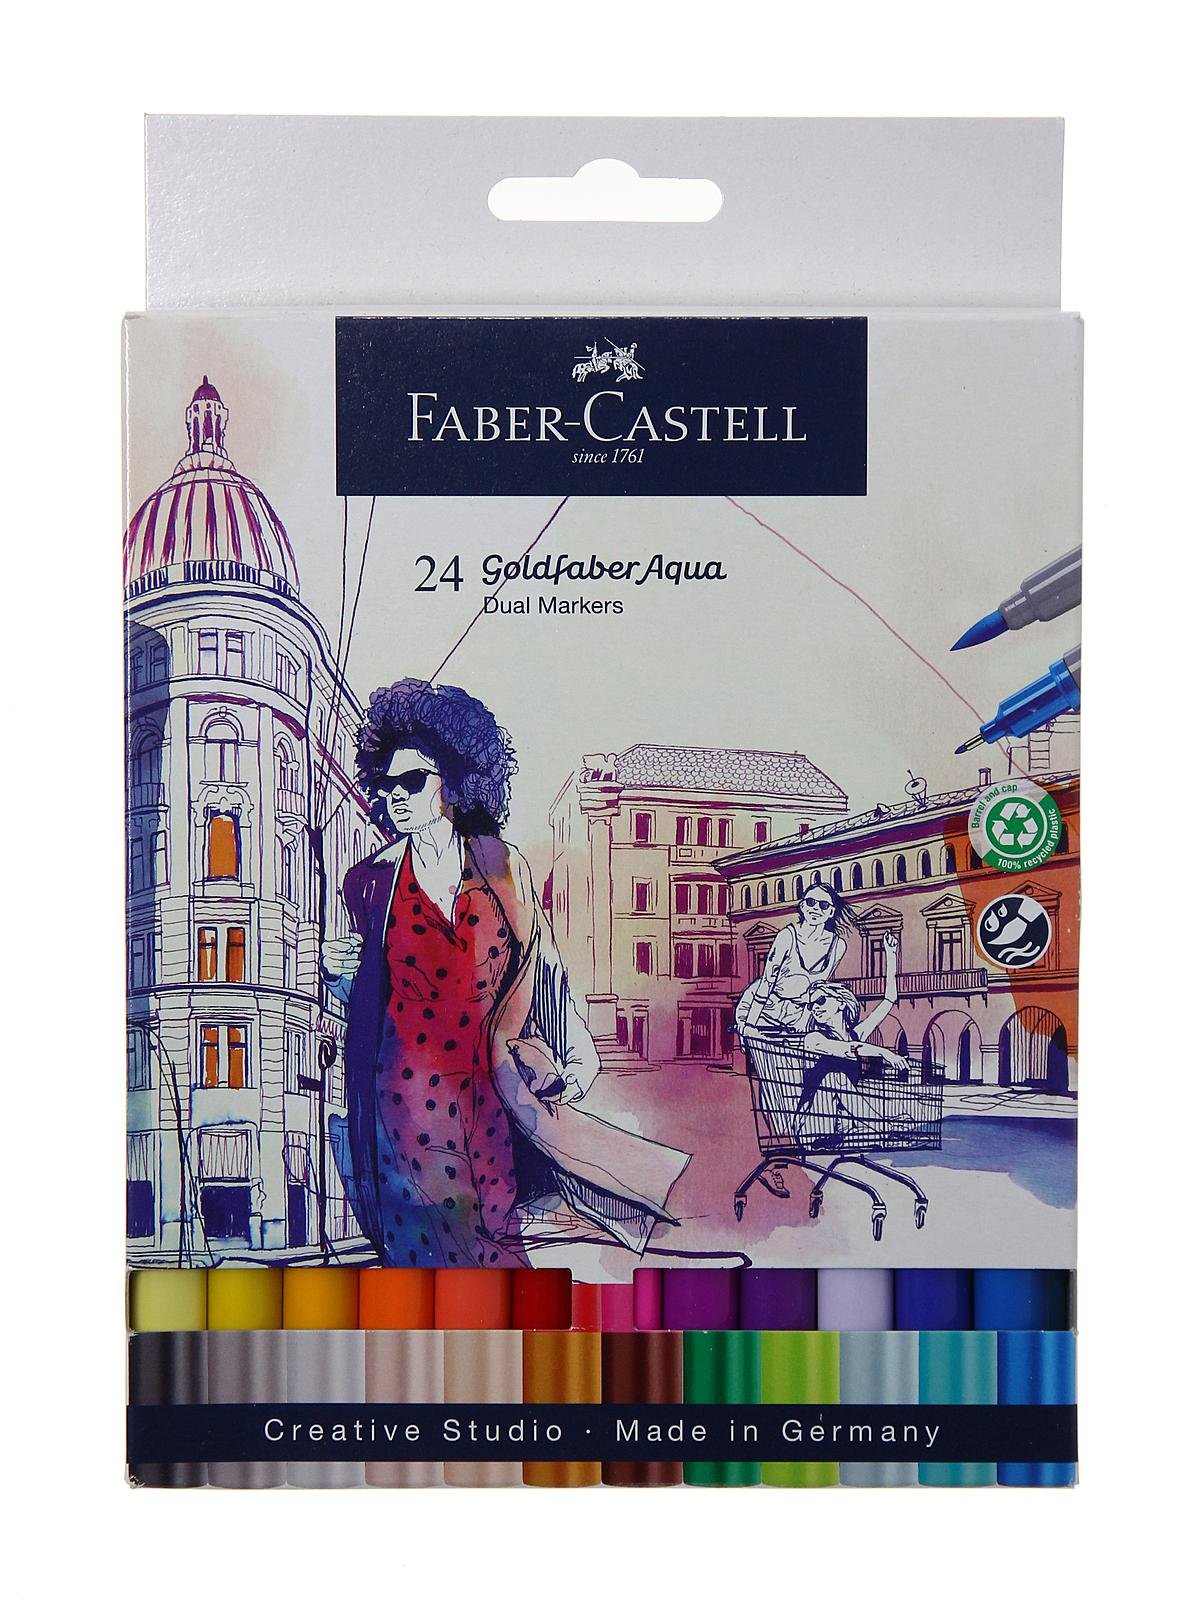 Faber-Castell Goldfaber Aqua Dual Markers- 18 Count Art Set for Artists of  All Skill Levels 